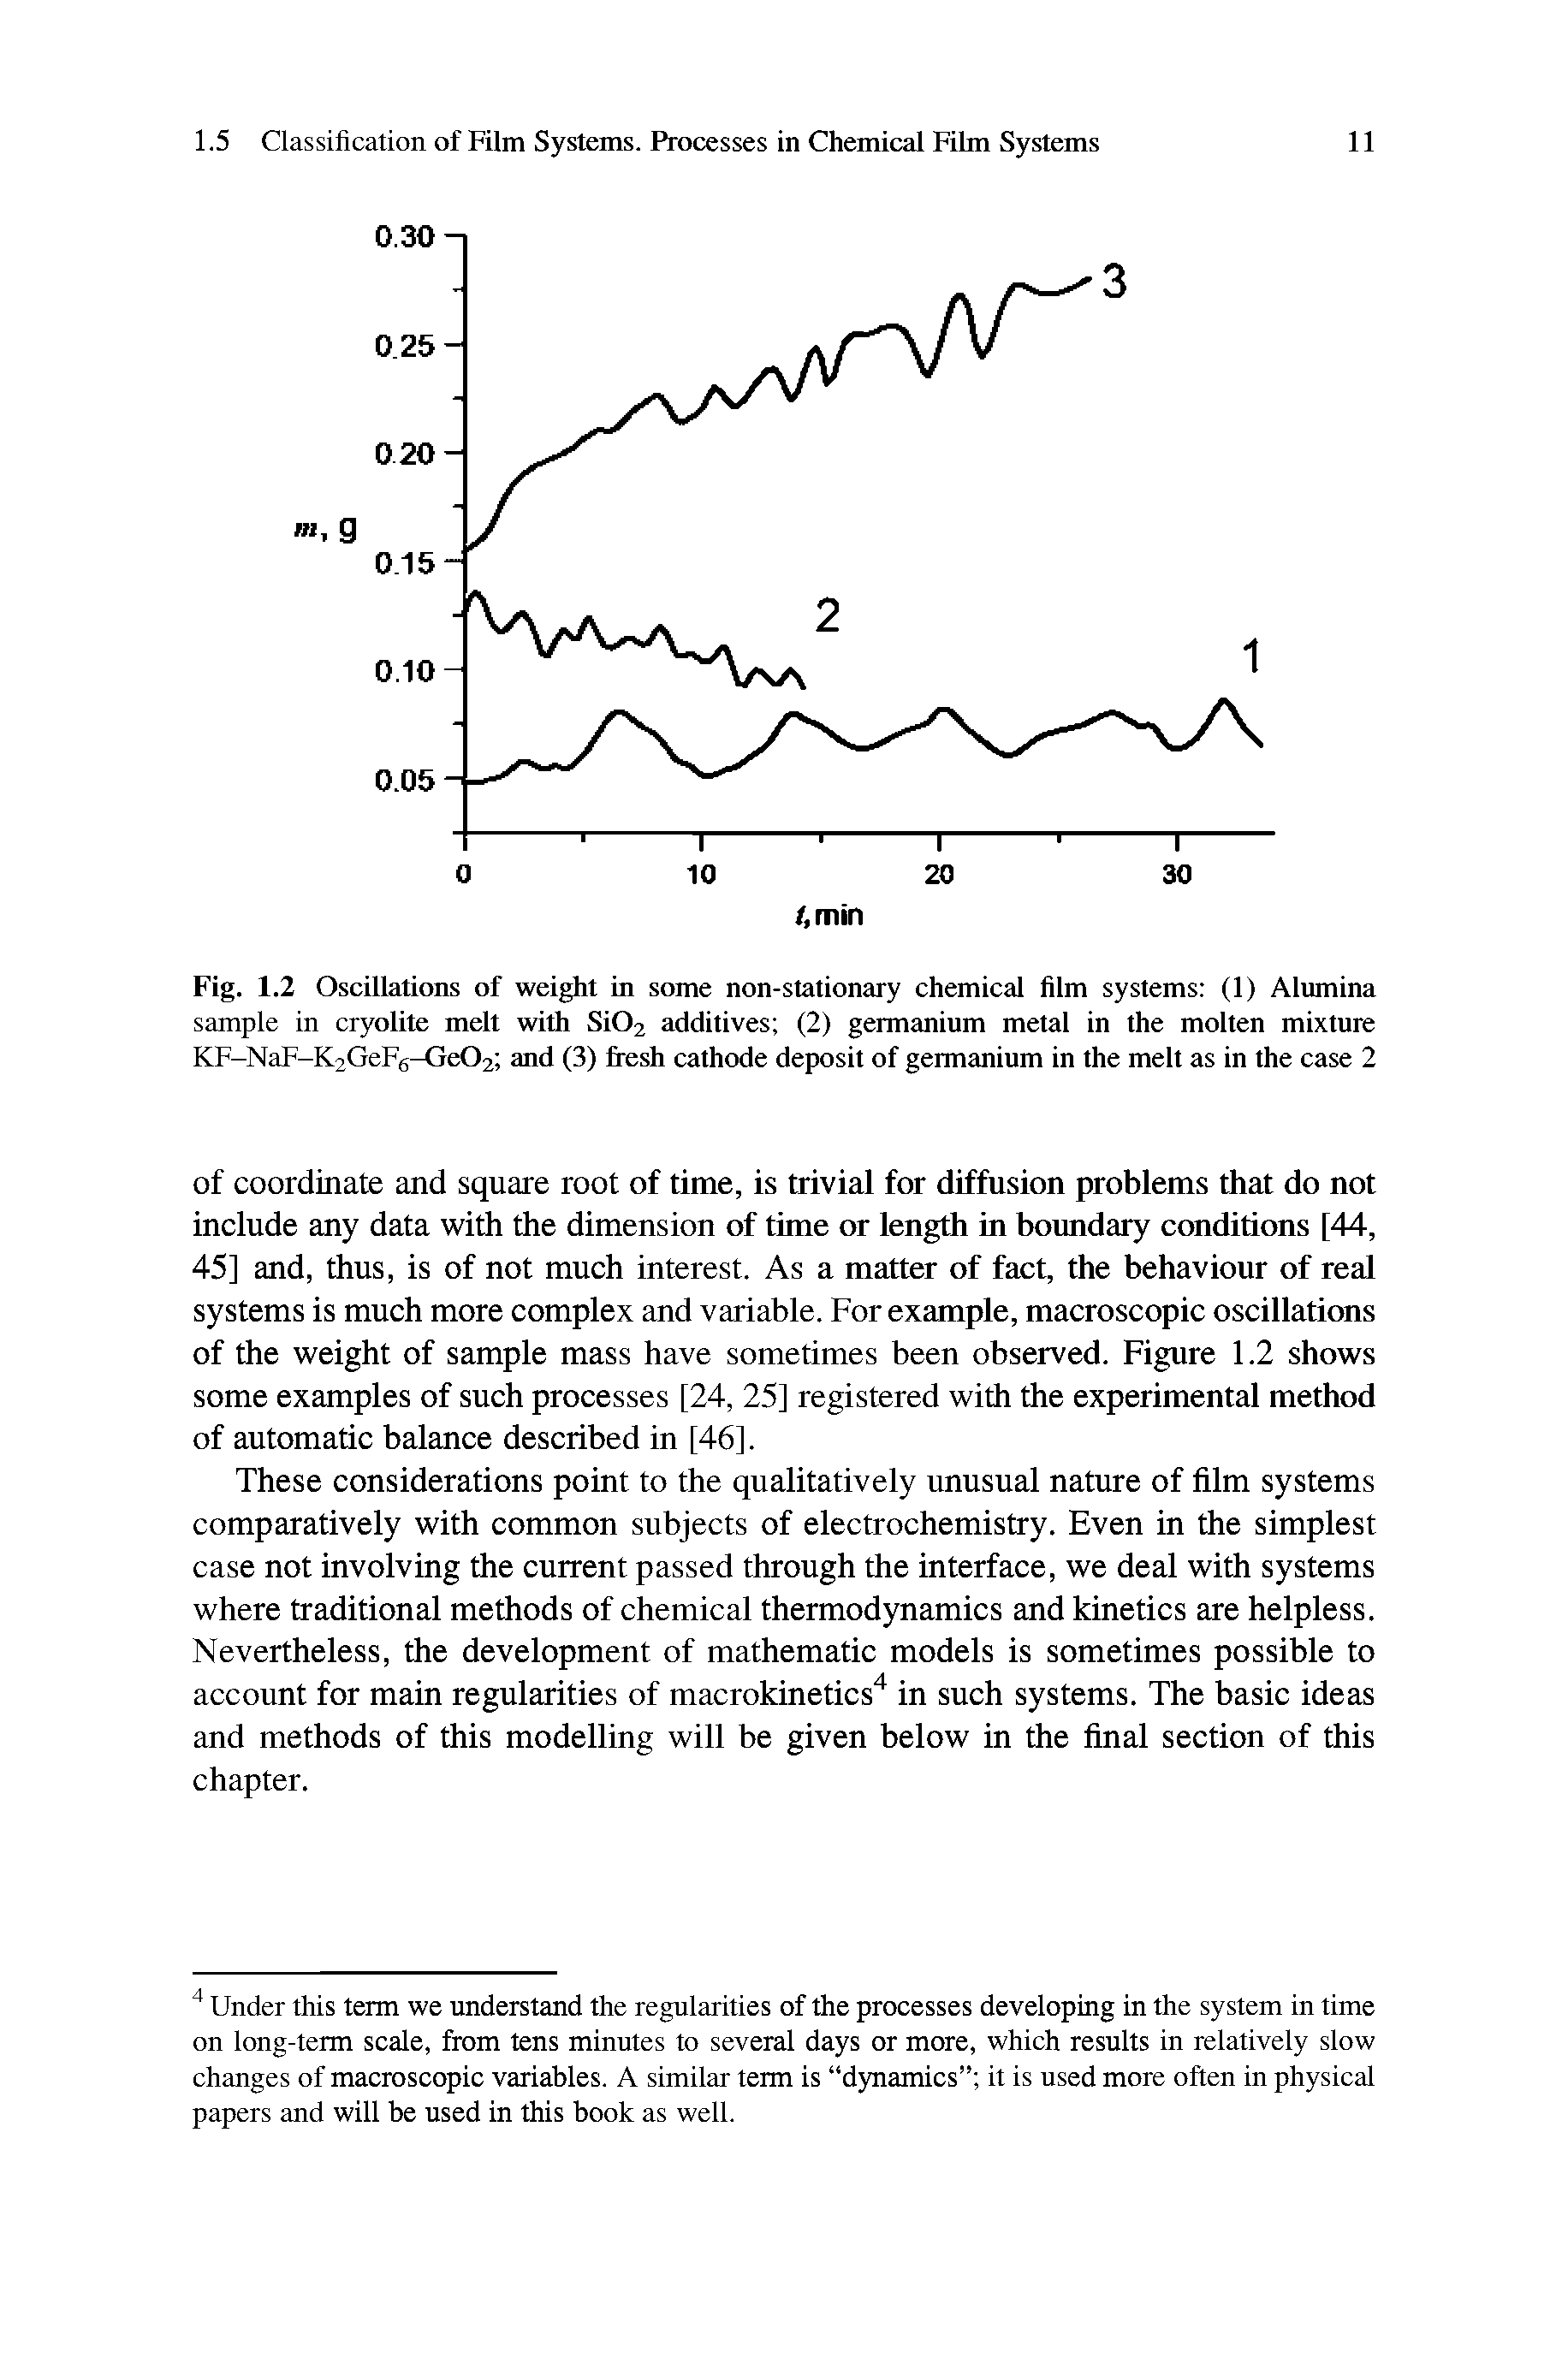 Fig. 1.2 Oscillations of weight in some non-stationary chemical film systems (1) Alumina sample in cryolite melt with Si02 additives (2) germanium metal in the molten mixture KF-NaF-K2GeF6-Ge02 and (3) fresh cathode deposit of germanium in the melt as in the case 2...